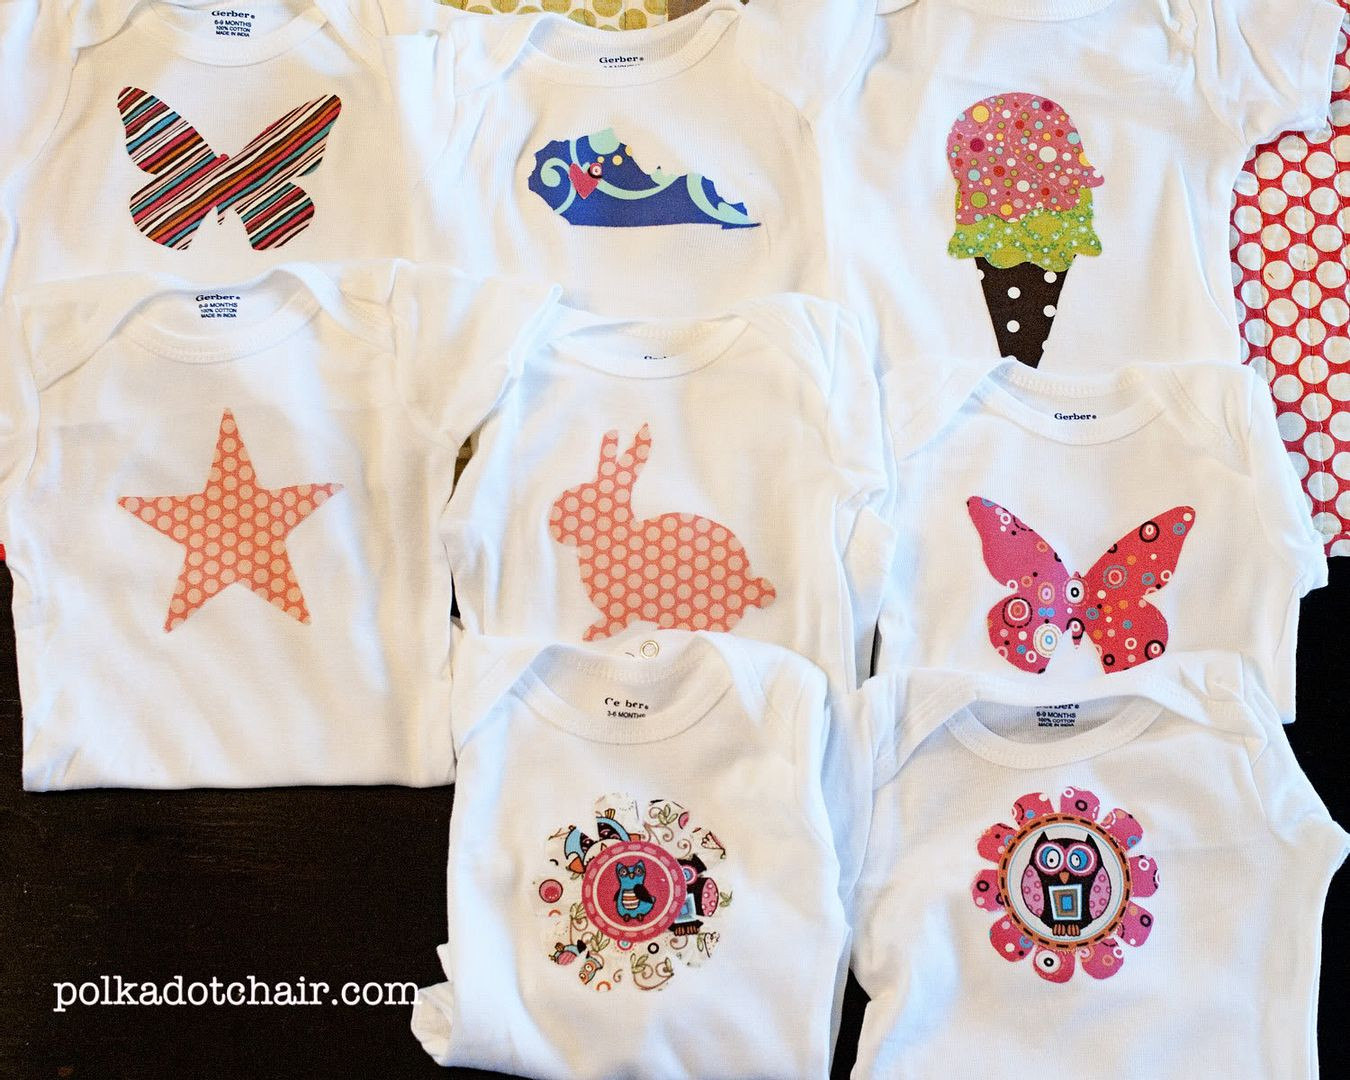 Baby Onesie Ideas For Decorating
 Baby Shower Crafts Decorate esie s The Polkadot Chair